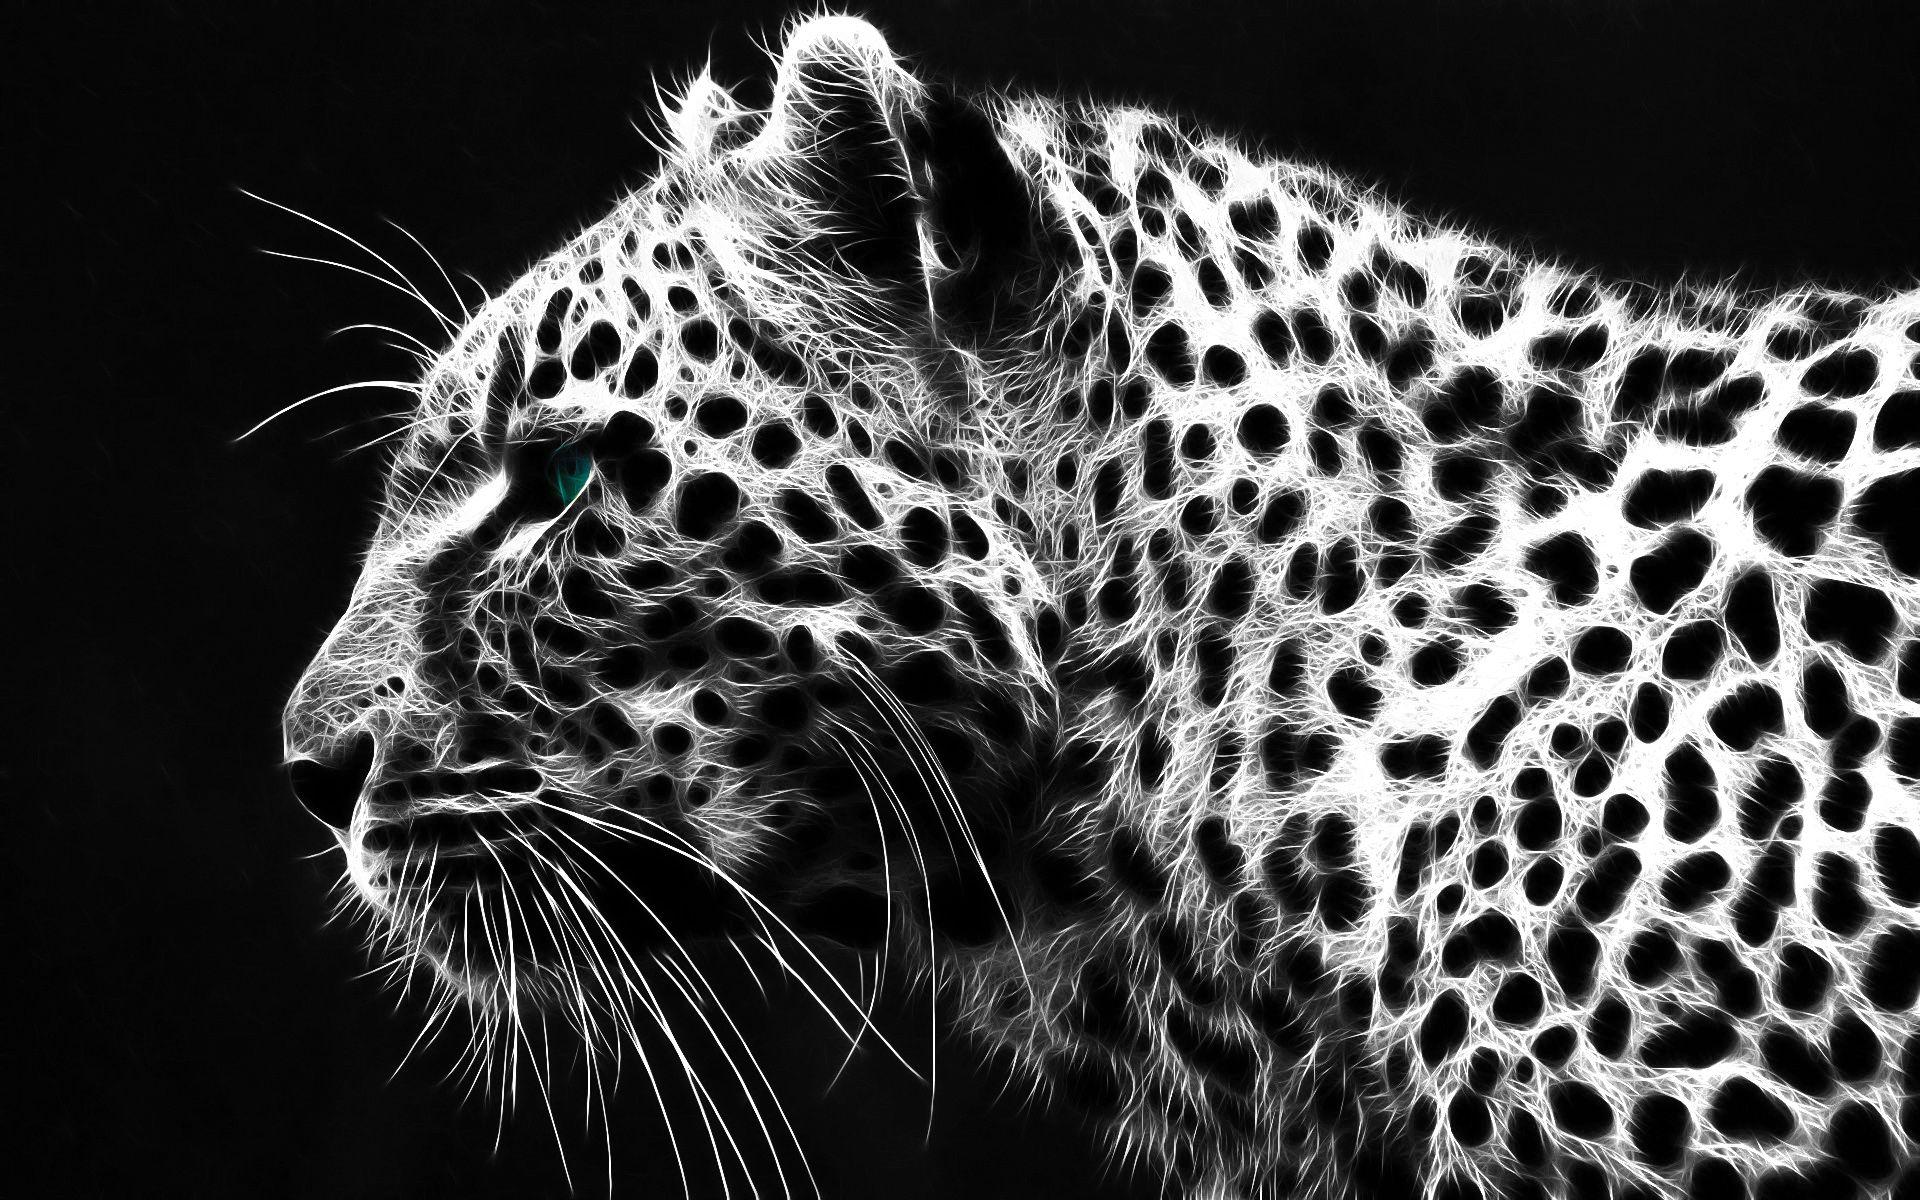 3D & Abstract Cheetah image. Beautiful image HD Picture & Desktop